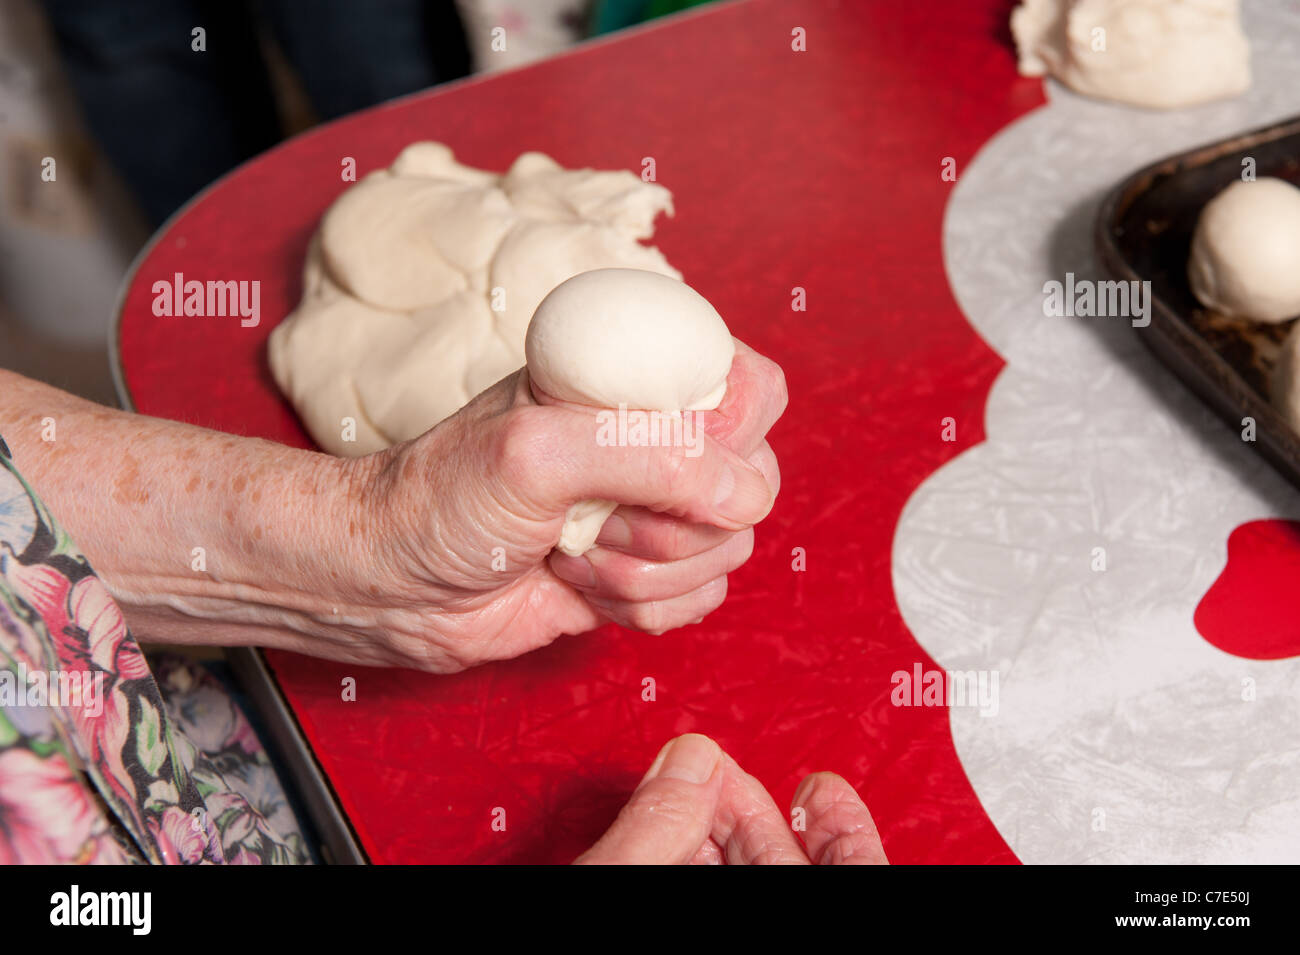 hands rolling dough ball in process of making beaten biscuits Stock Photo